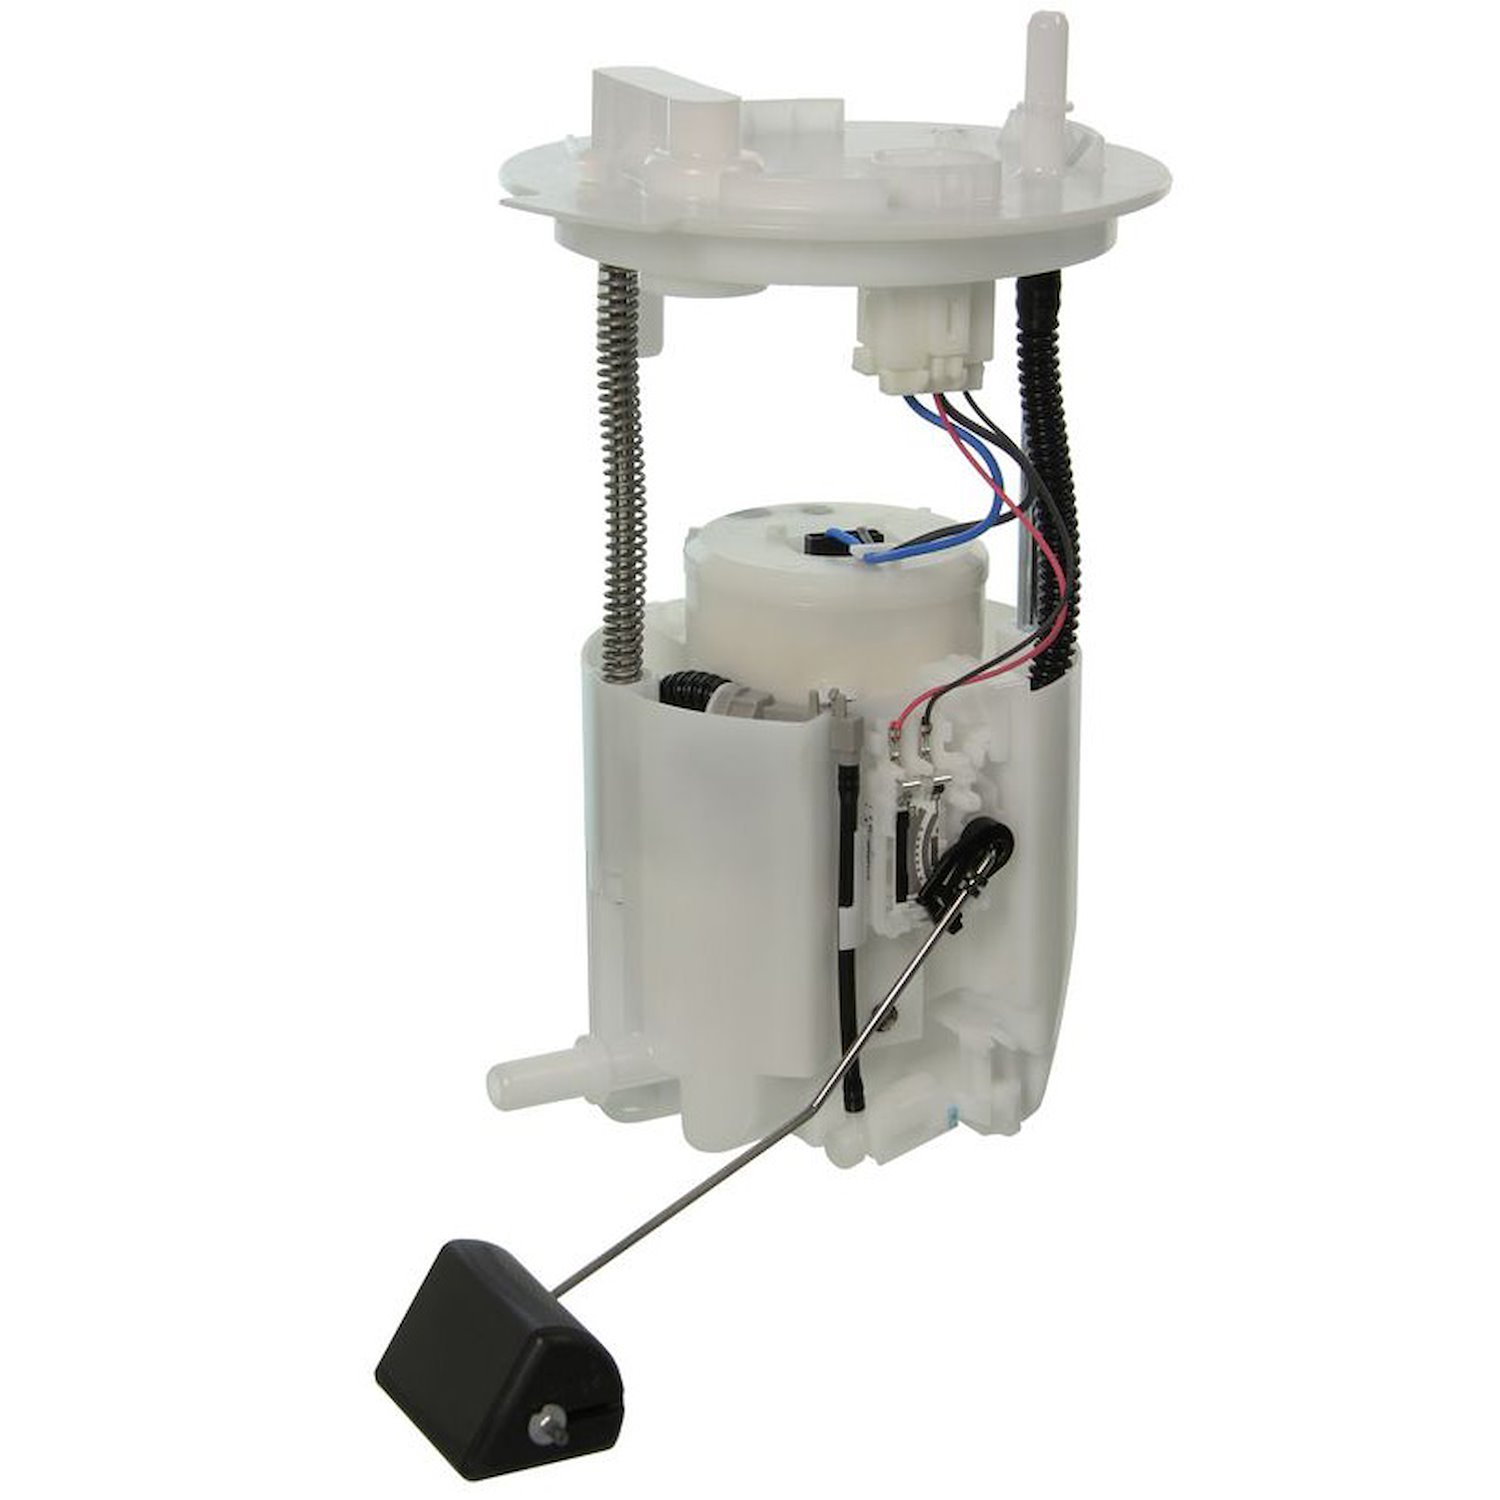 OE Ford/Lincoln Replacement Fuel Pump Module Assembly for 2010-2012 Ford Taurus/Lincoln MKS